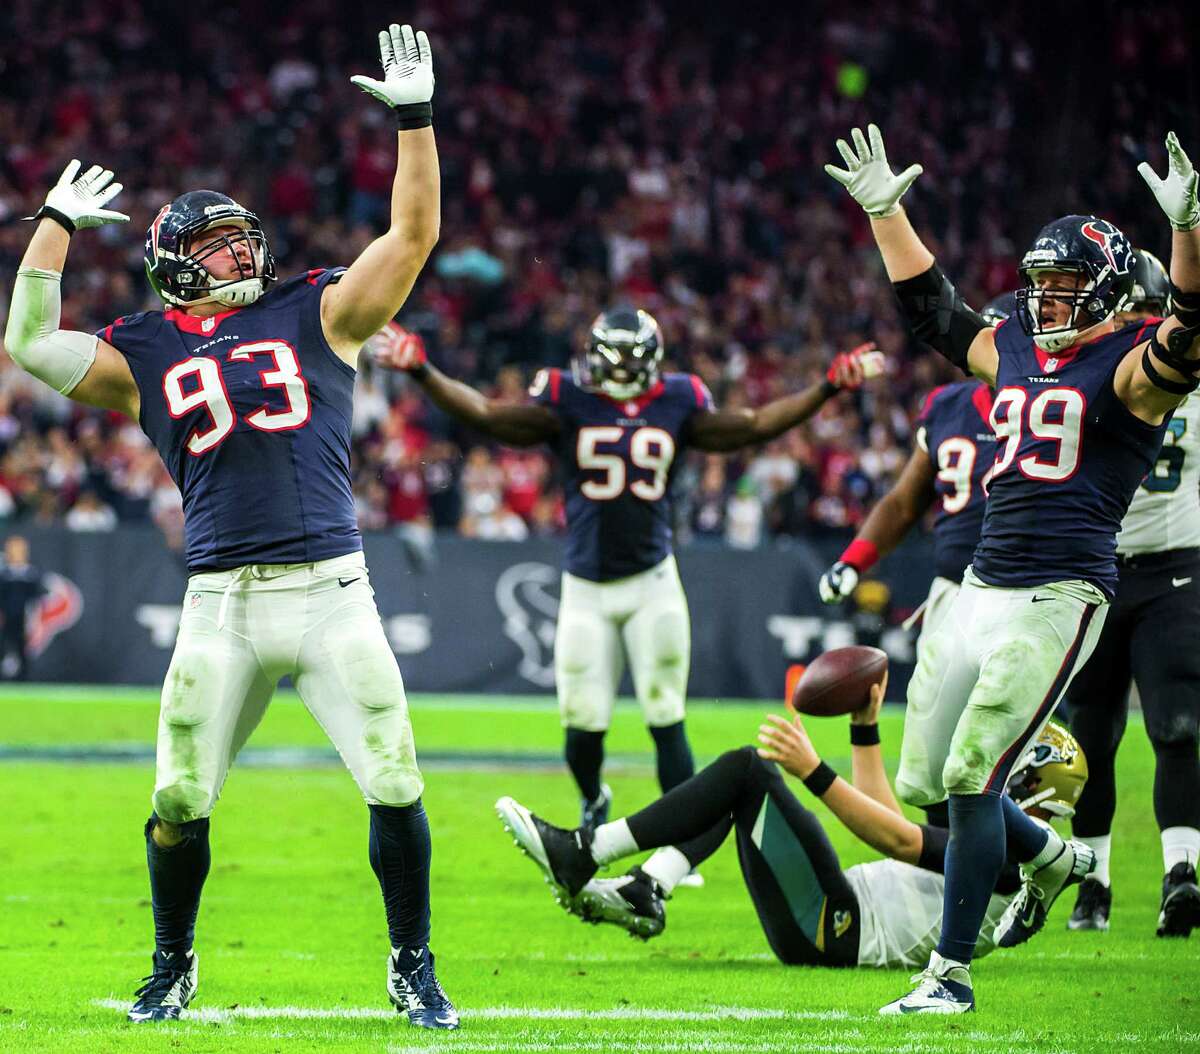 Defensive end Jared Crick (93) celebrates with J.J. Watt (99) after sacking Blake Bortles in the second half Sunday. Crick said the 9-7 record was bittersweet because the Texans failed to make the playoffs.